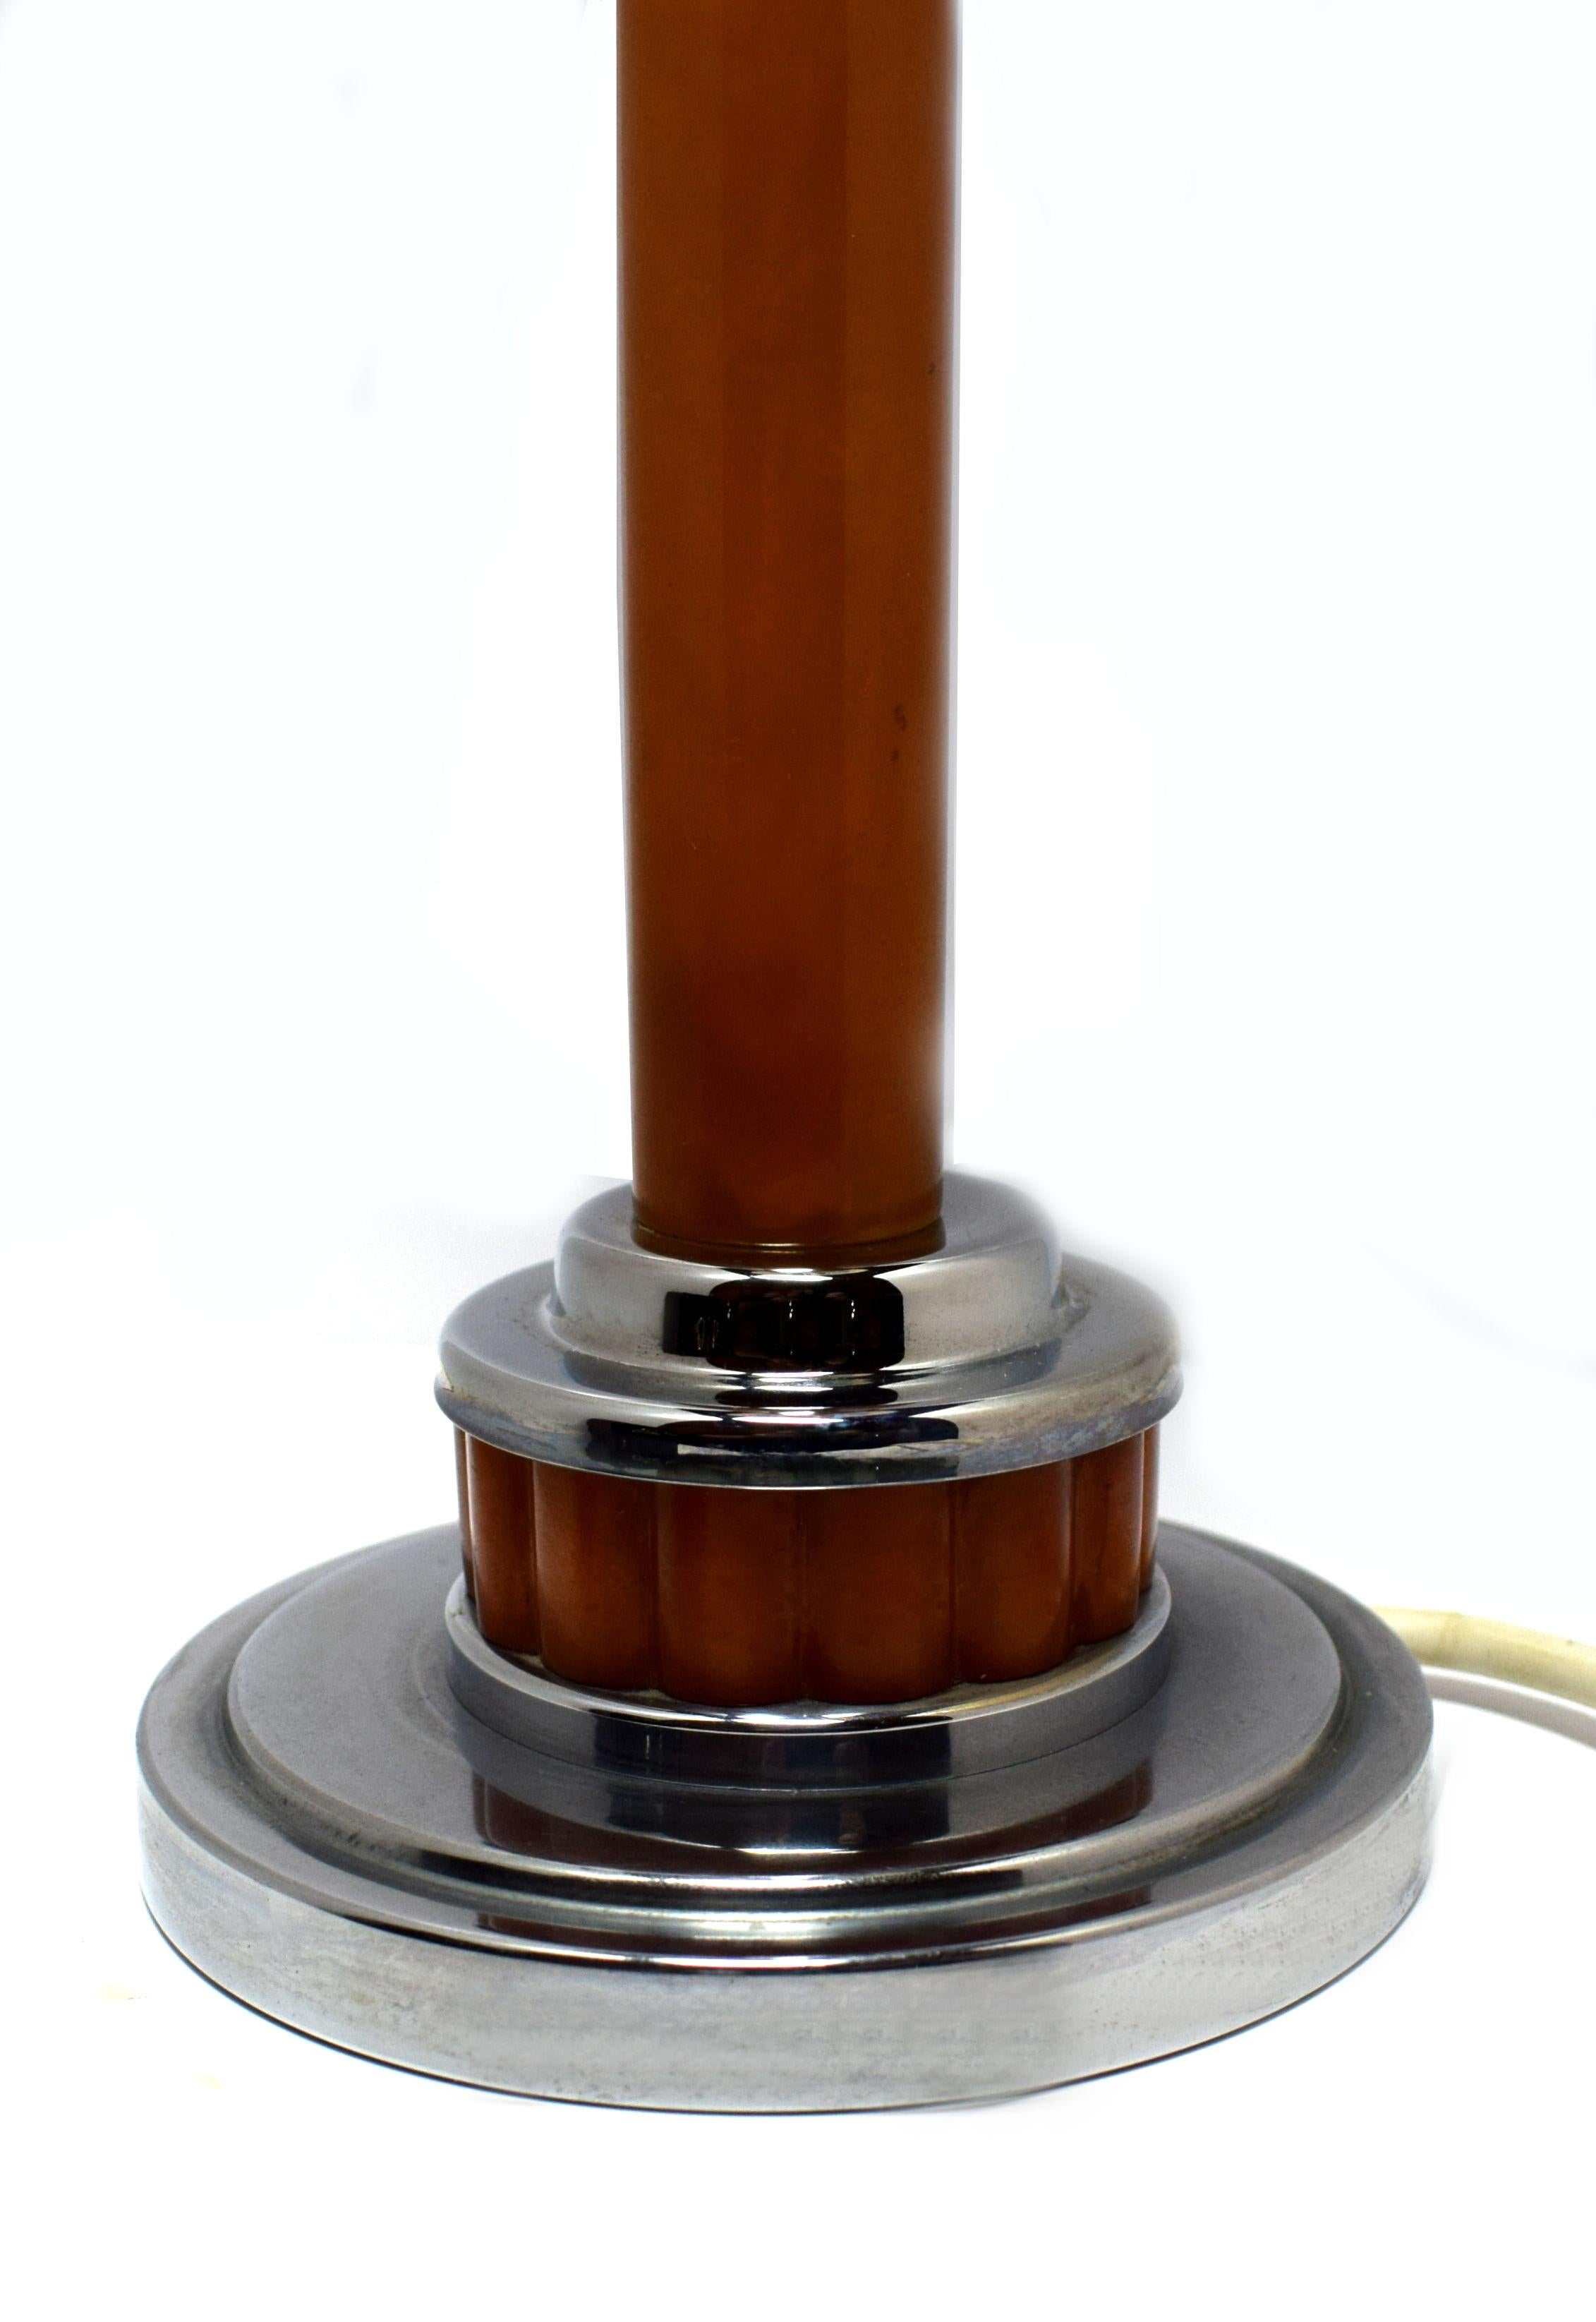 A very stylish example of another Art Deco classic is this 1930s Art Deco Bakelite lamp. A stunning butterscotch phenolic Bakelite colored stem sits atop an all chrome circular stepped base with another catalin Bakelite accent, with a chrome bayonet